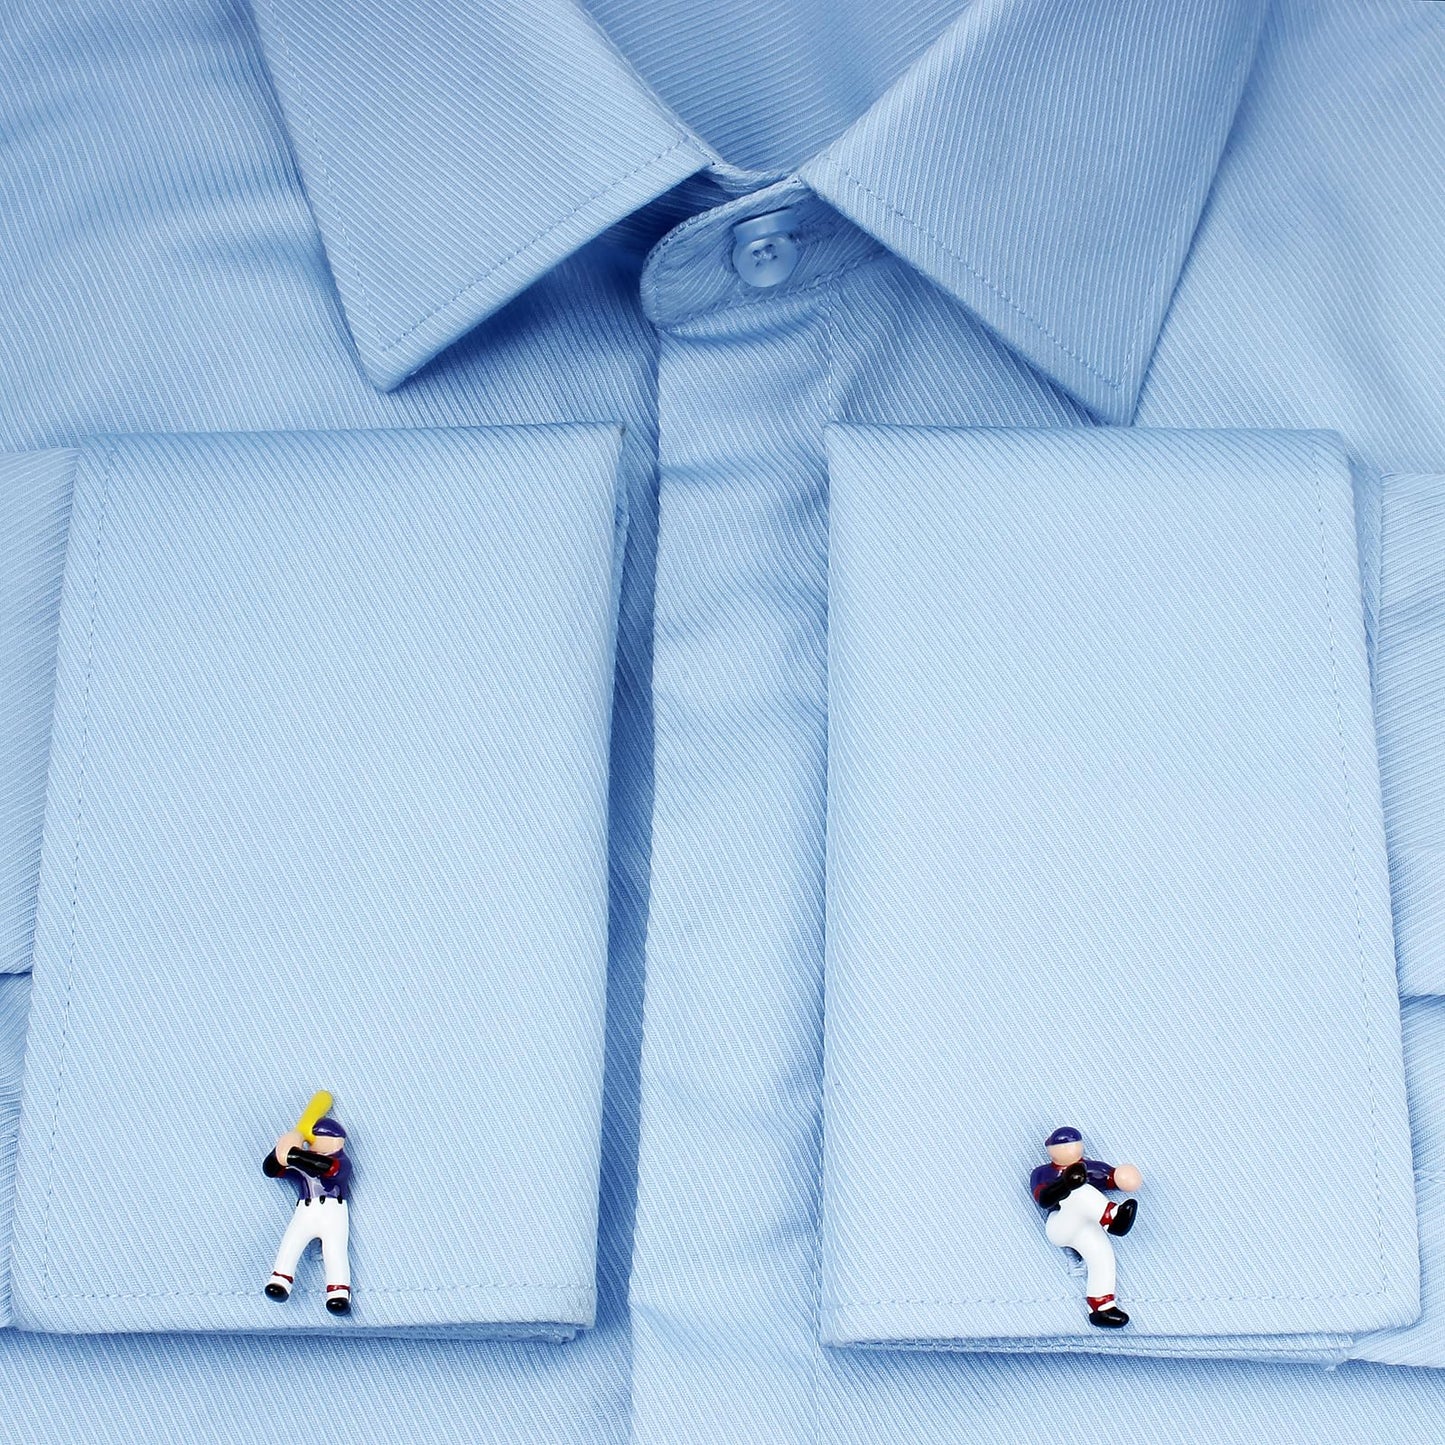 Cufflinks of a baseball player's pitcher and receiver